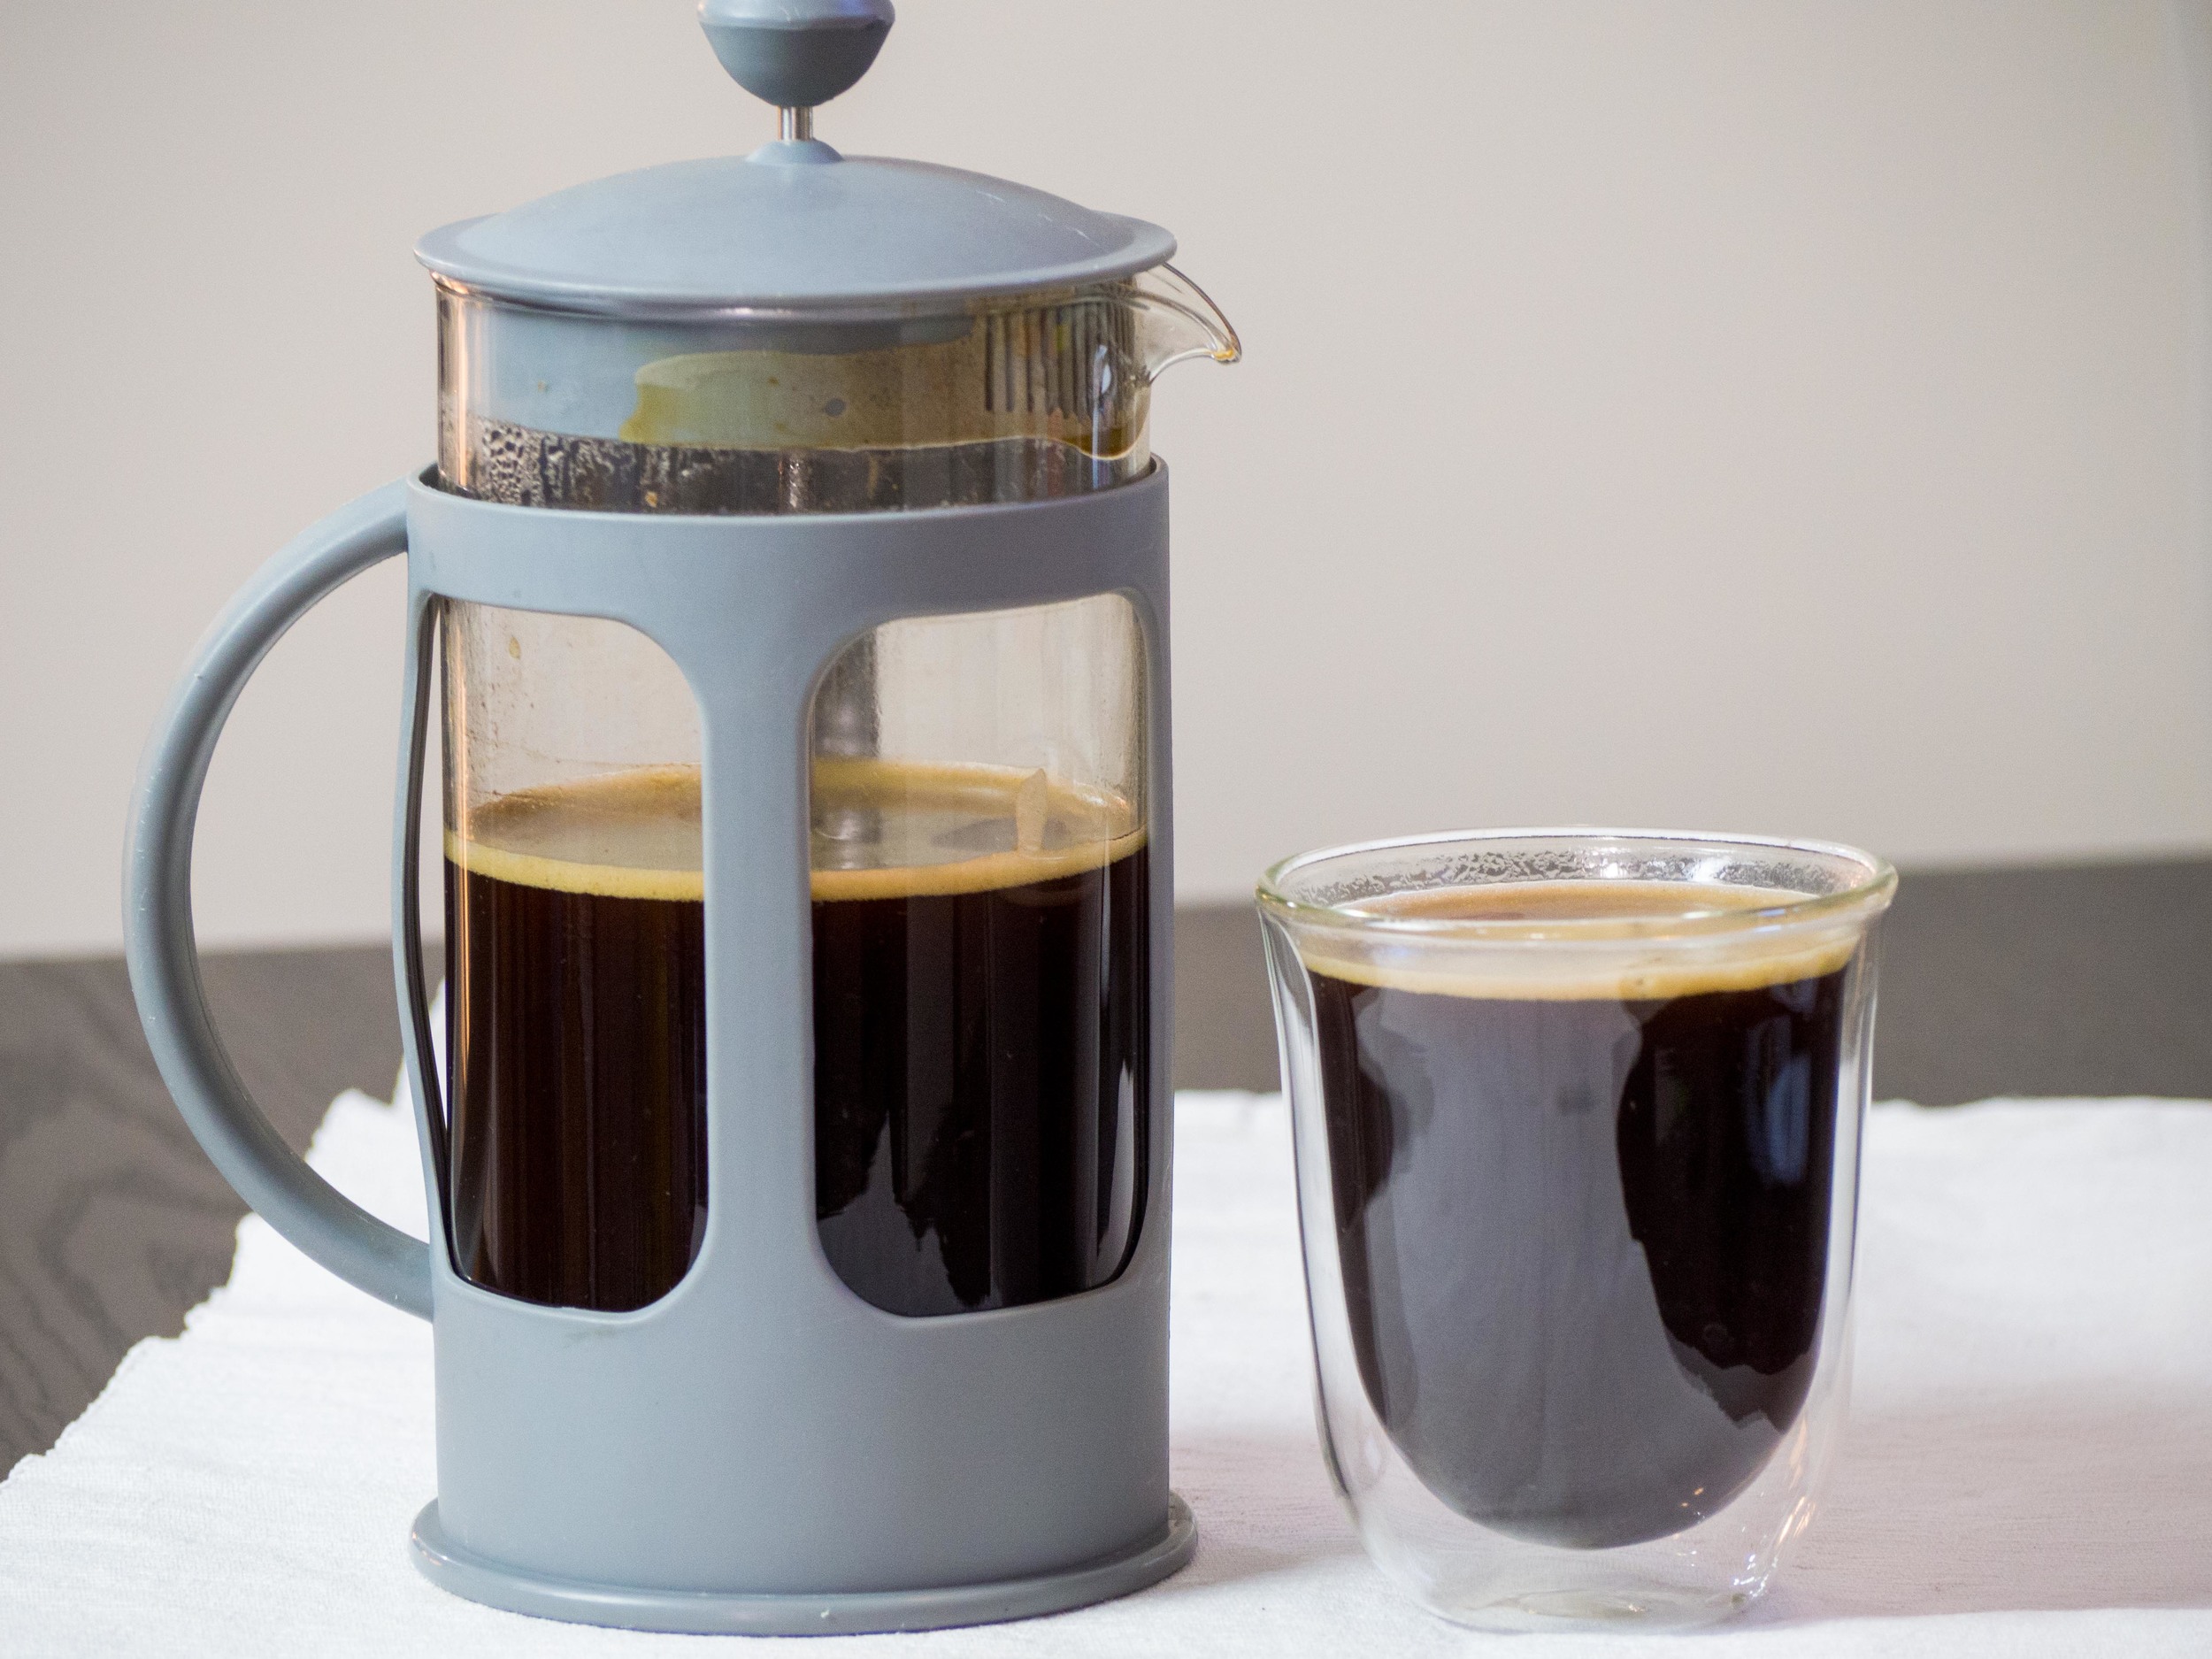 How To Get The Best Out Of Your French Press / Coffee Plunger